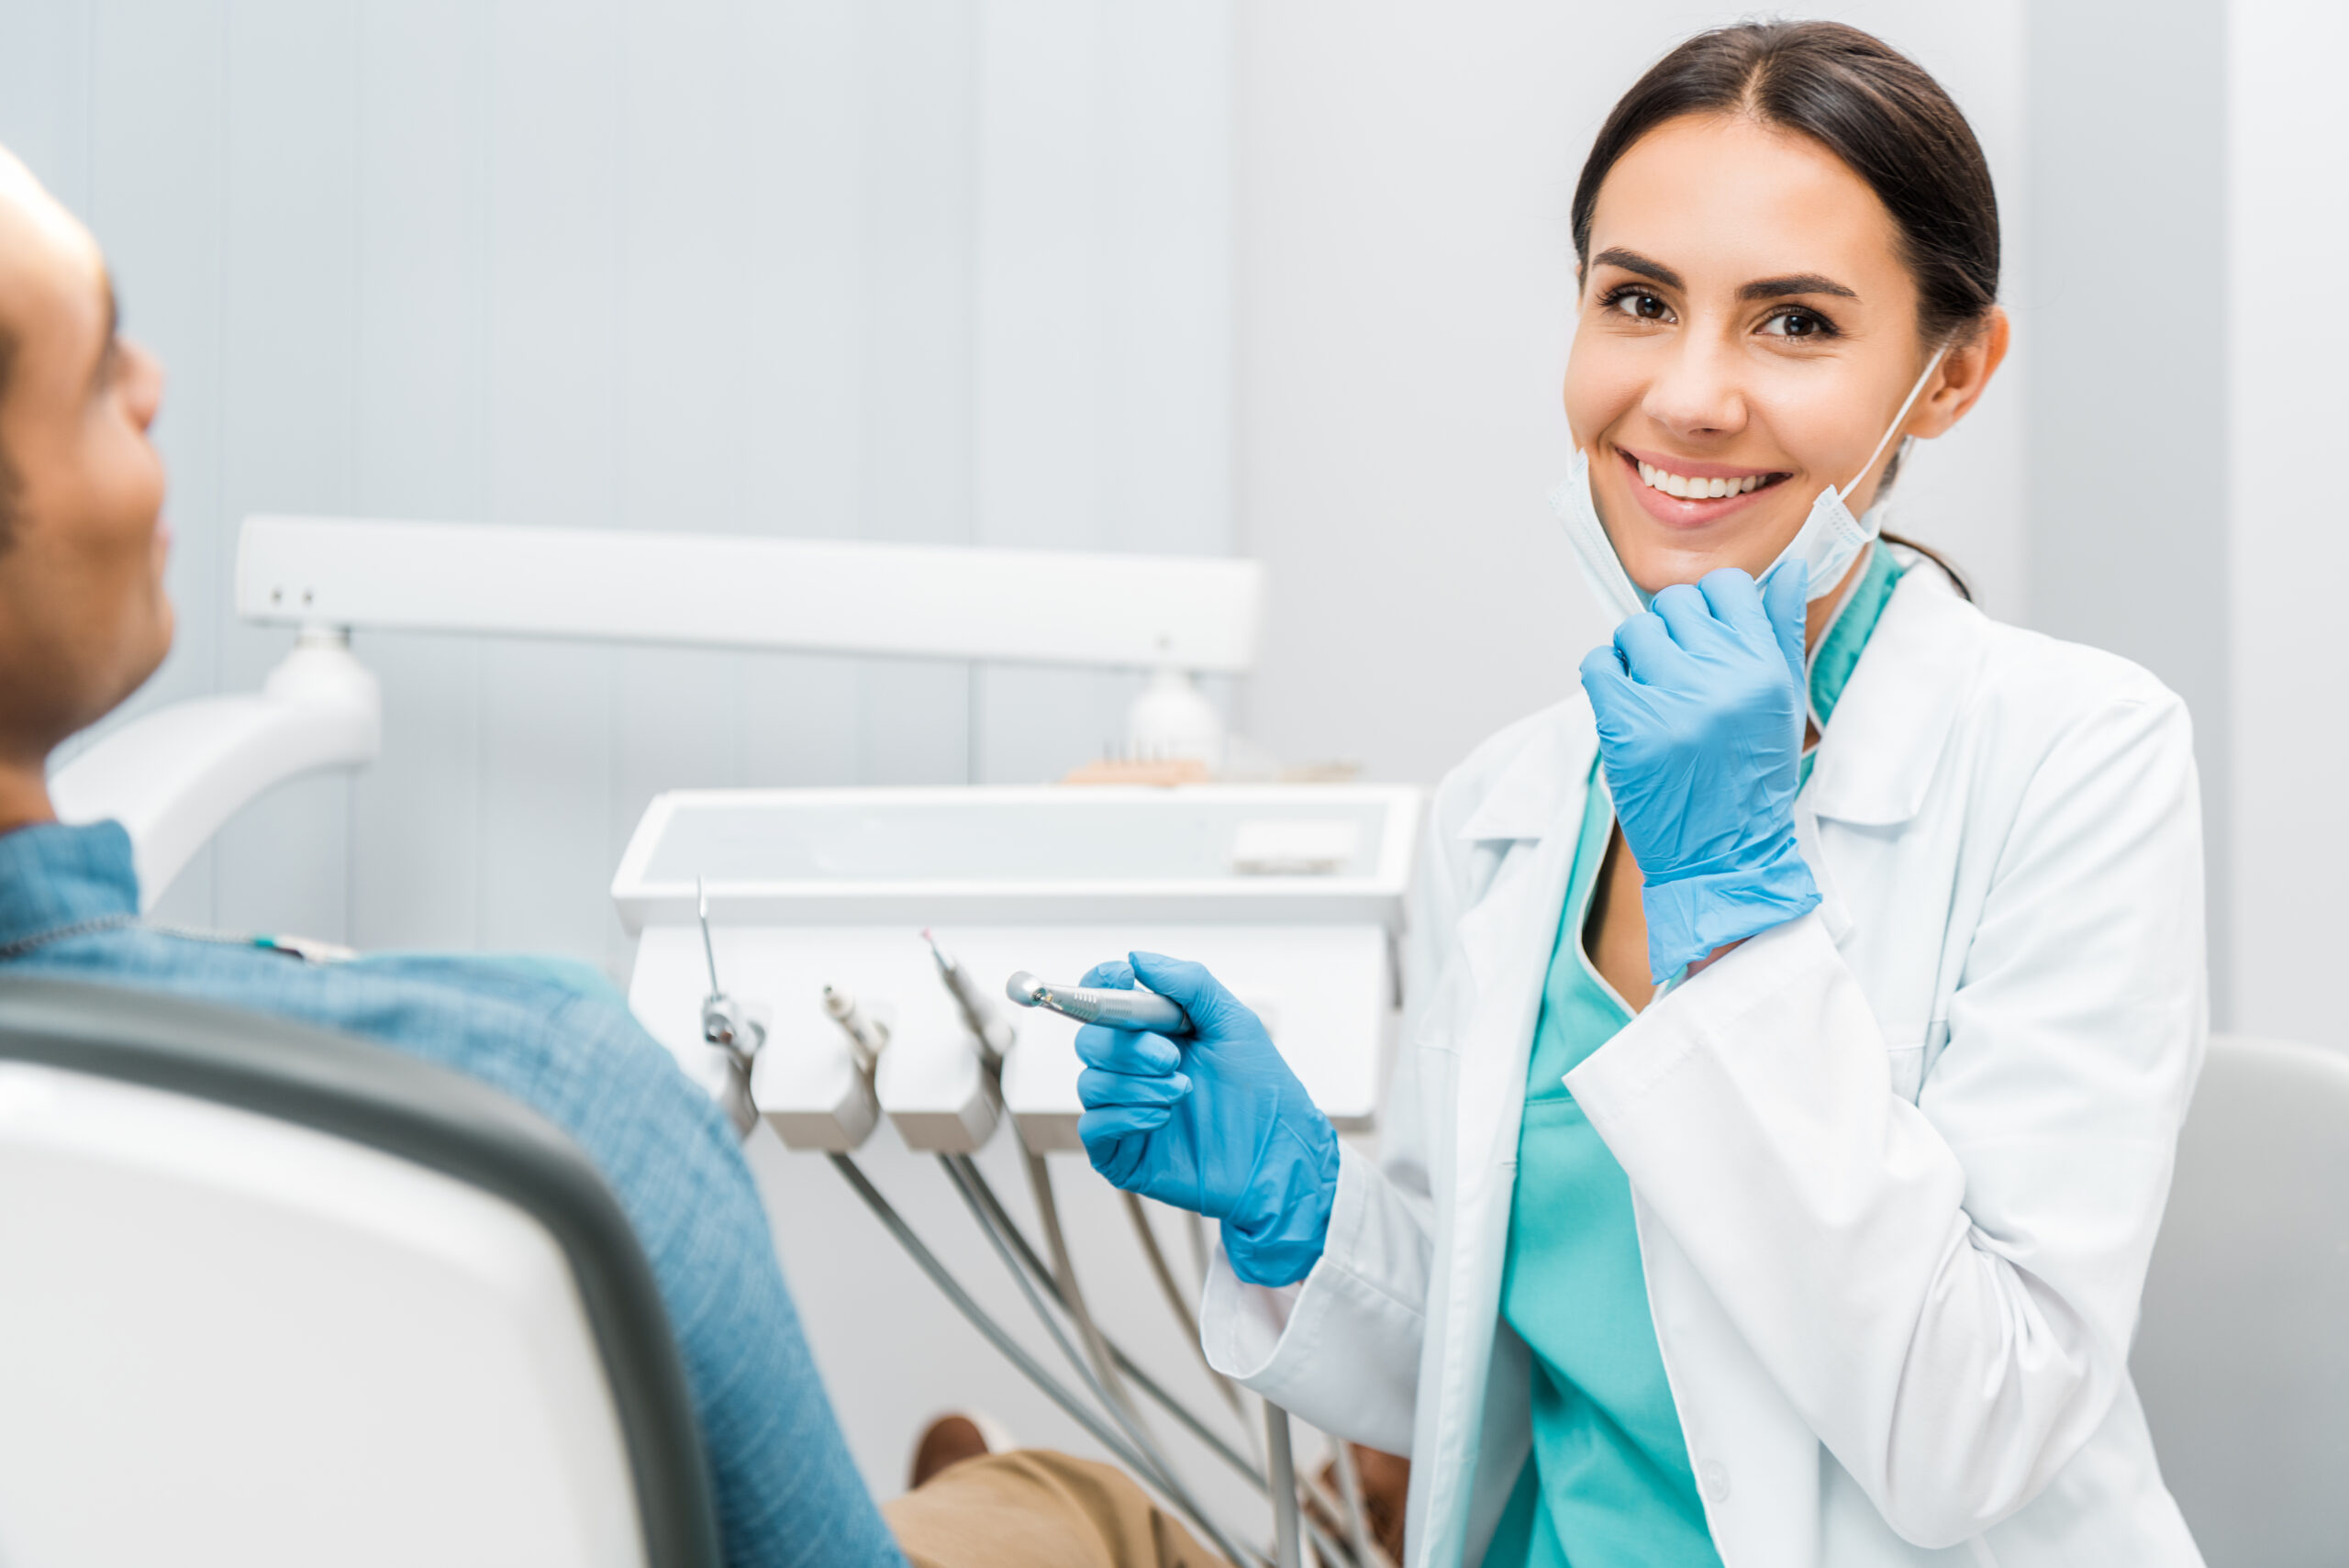 Choosing a Dental Implant Specialist: What Qualifications and Experience to Look For